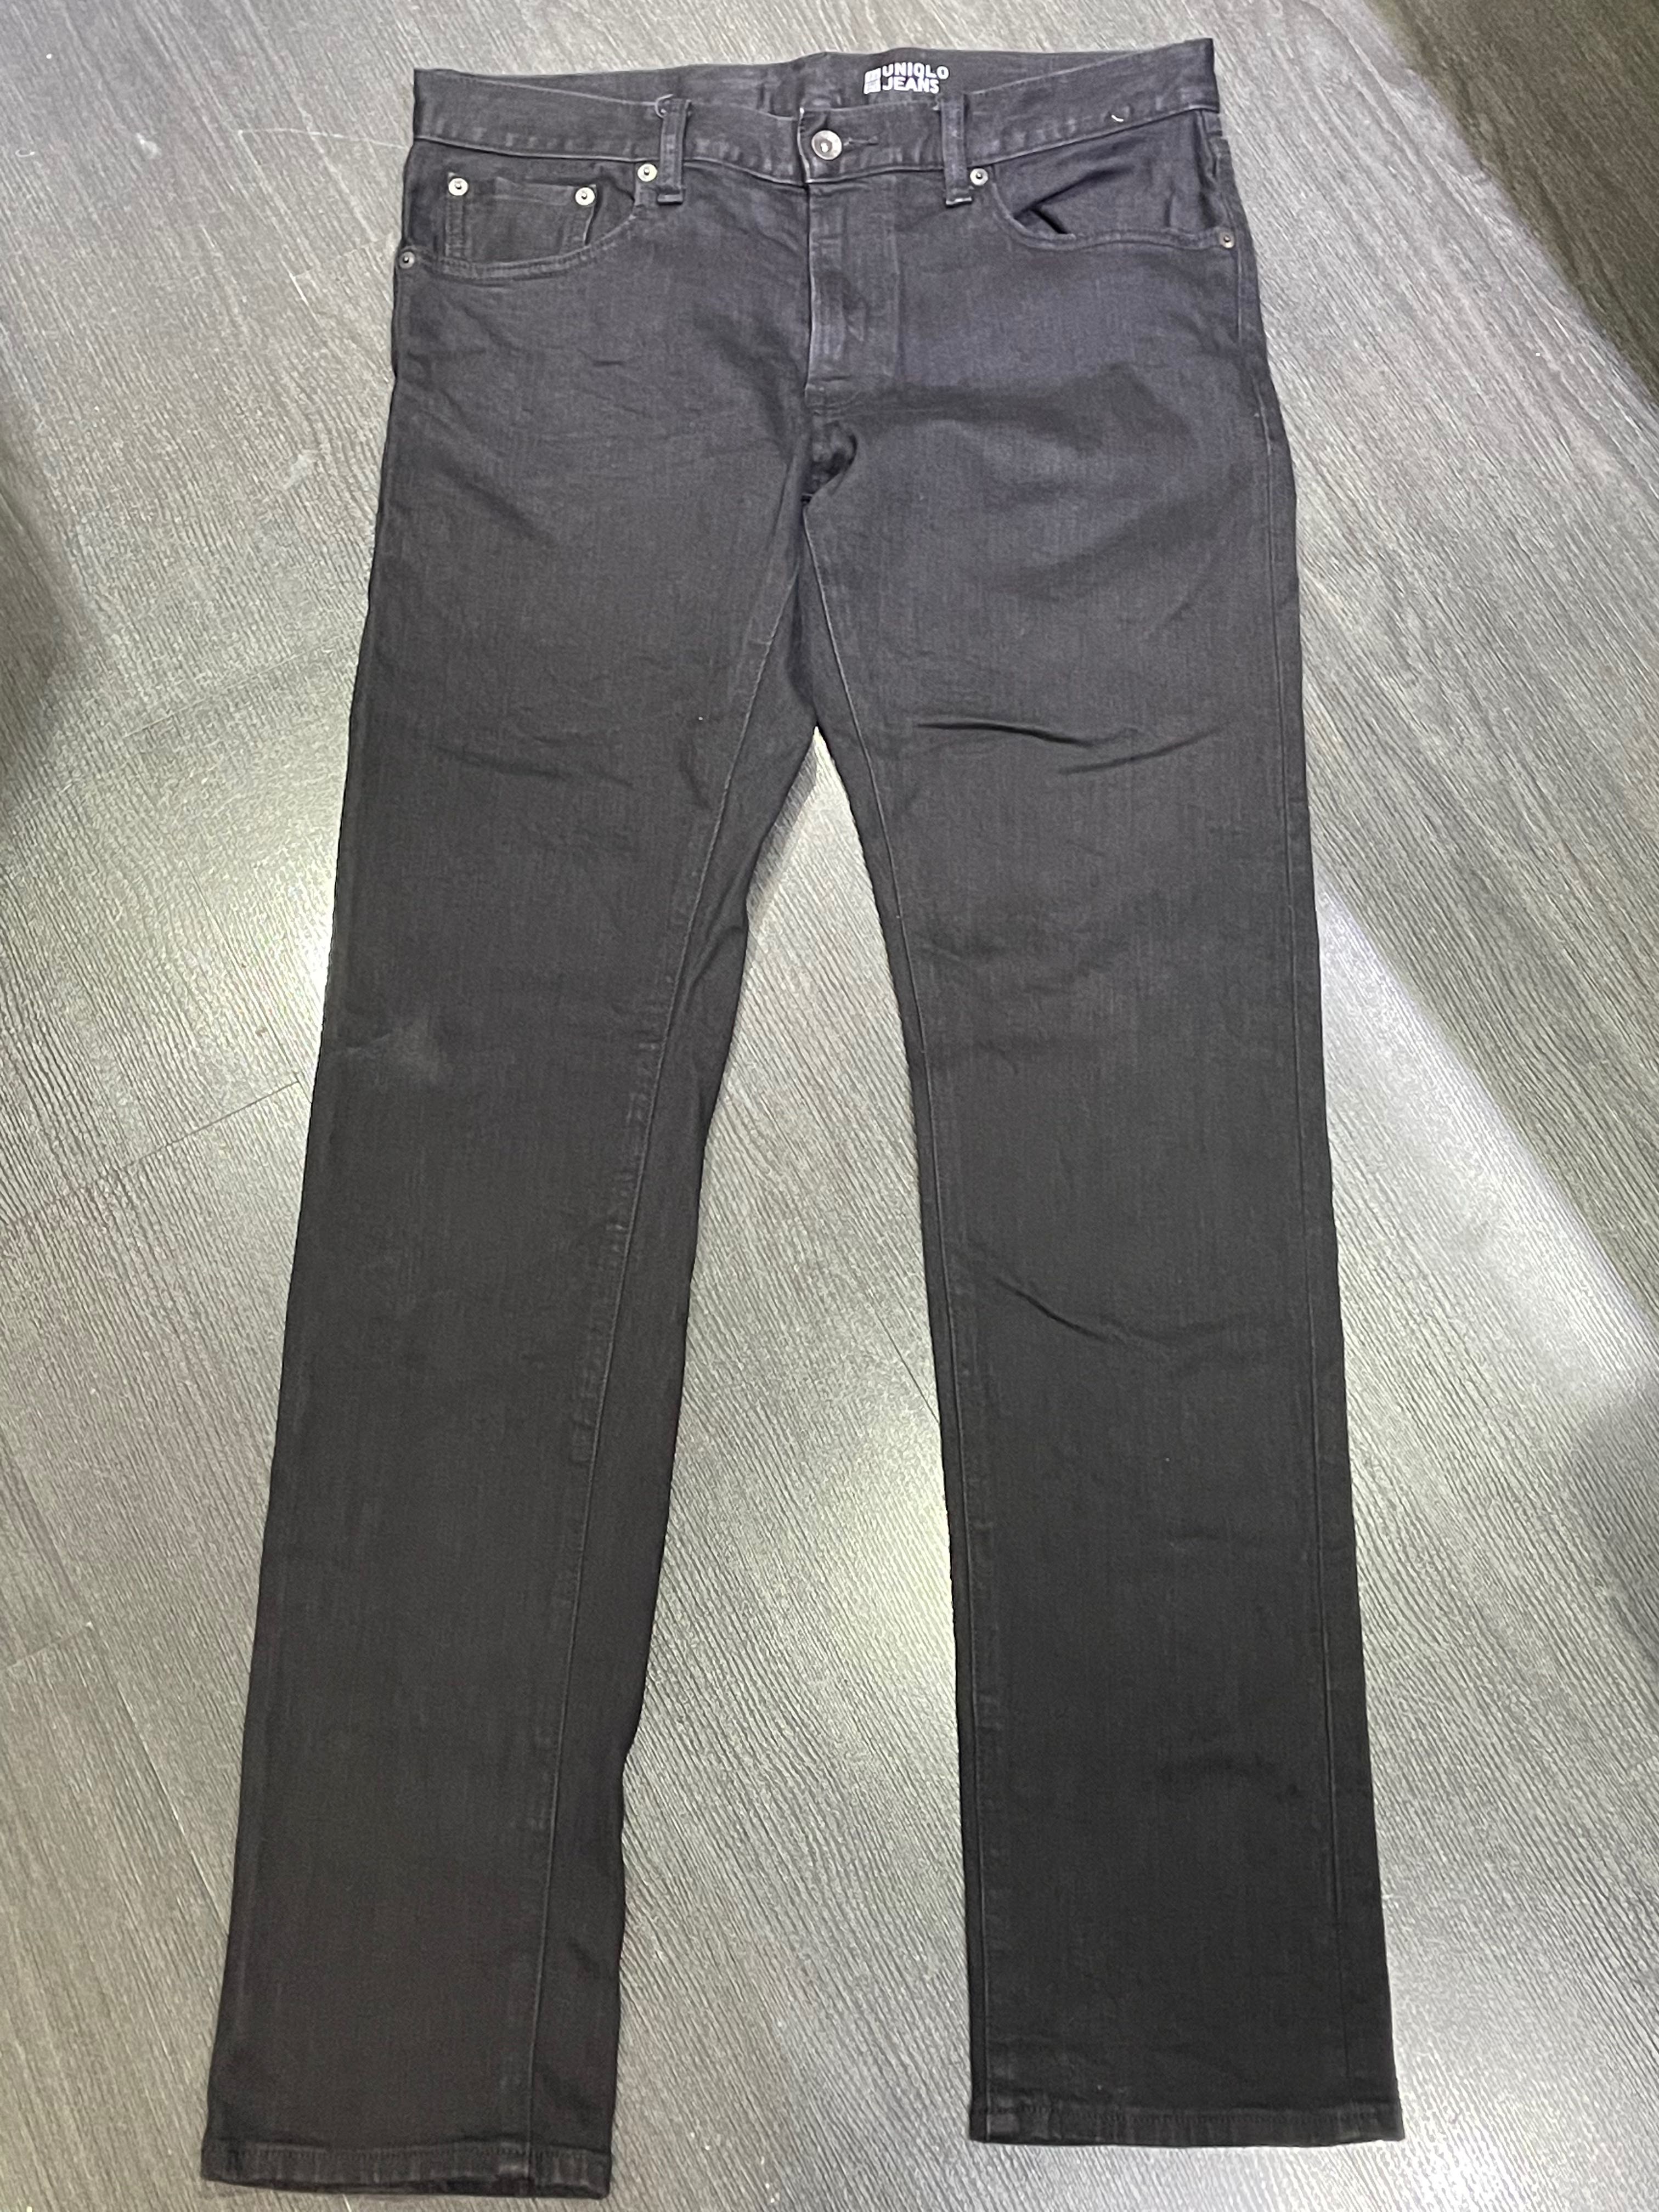 Uniglo Mens Jeans, Men's Fashion, Bottoms, Jeans on Carousell